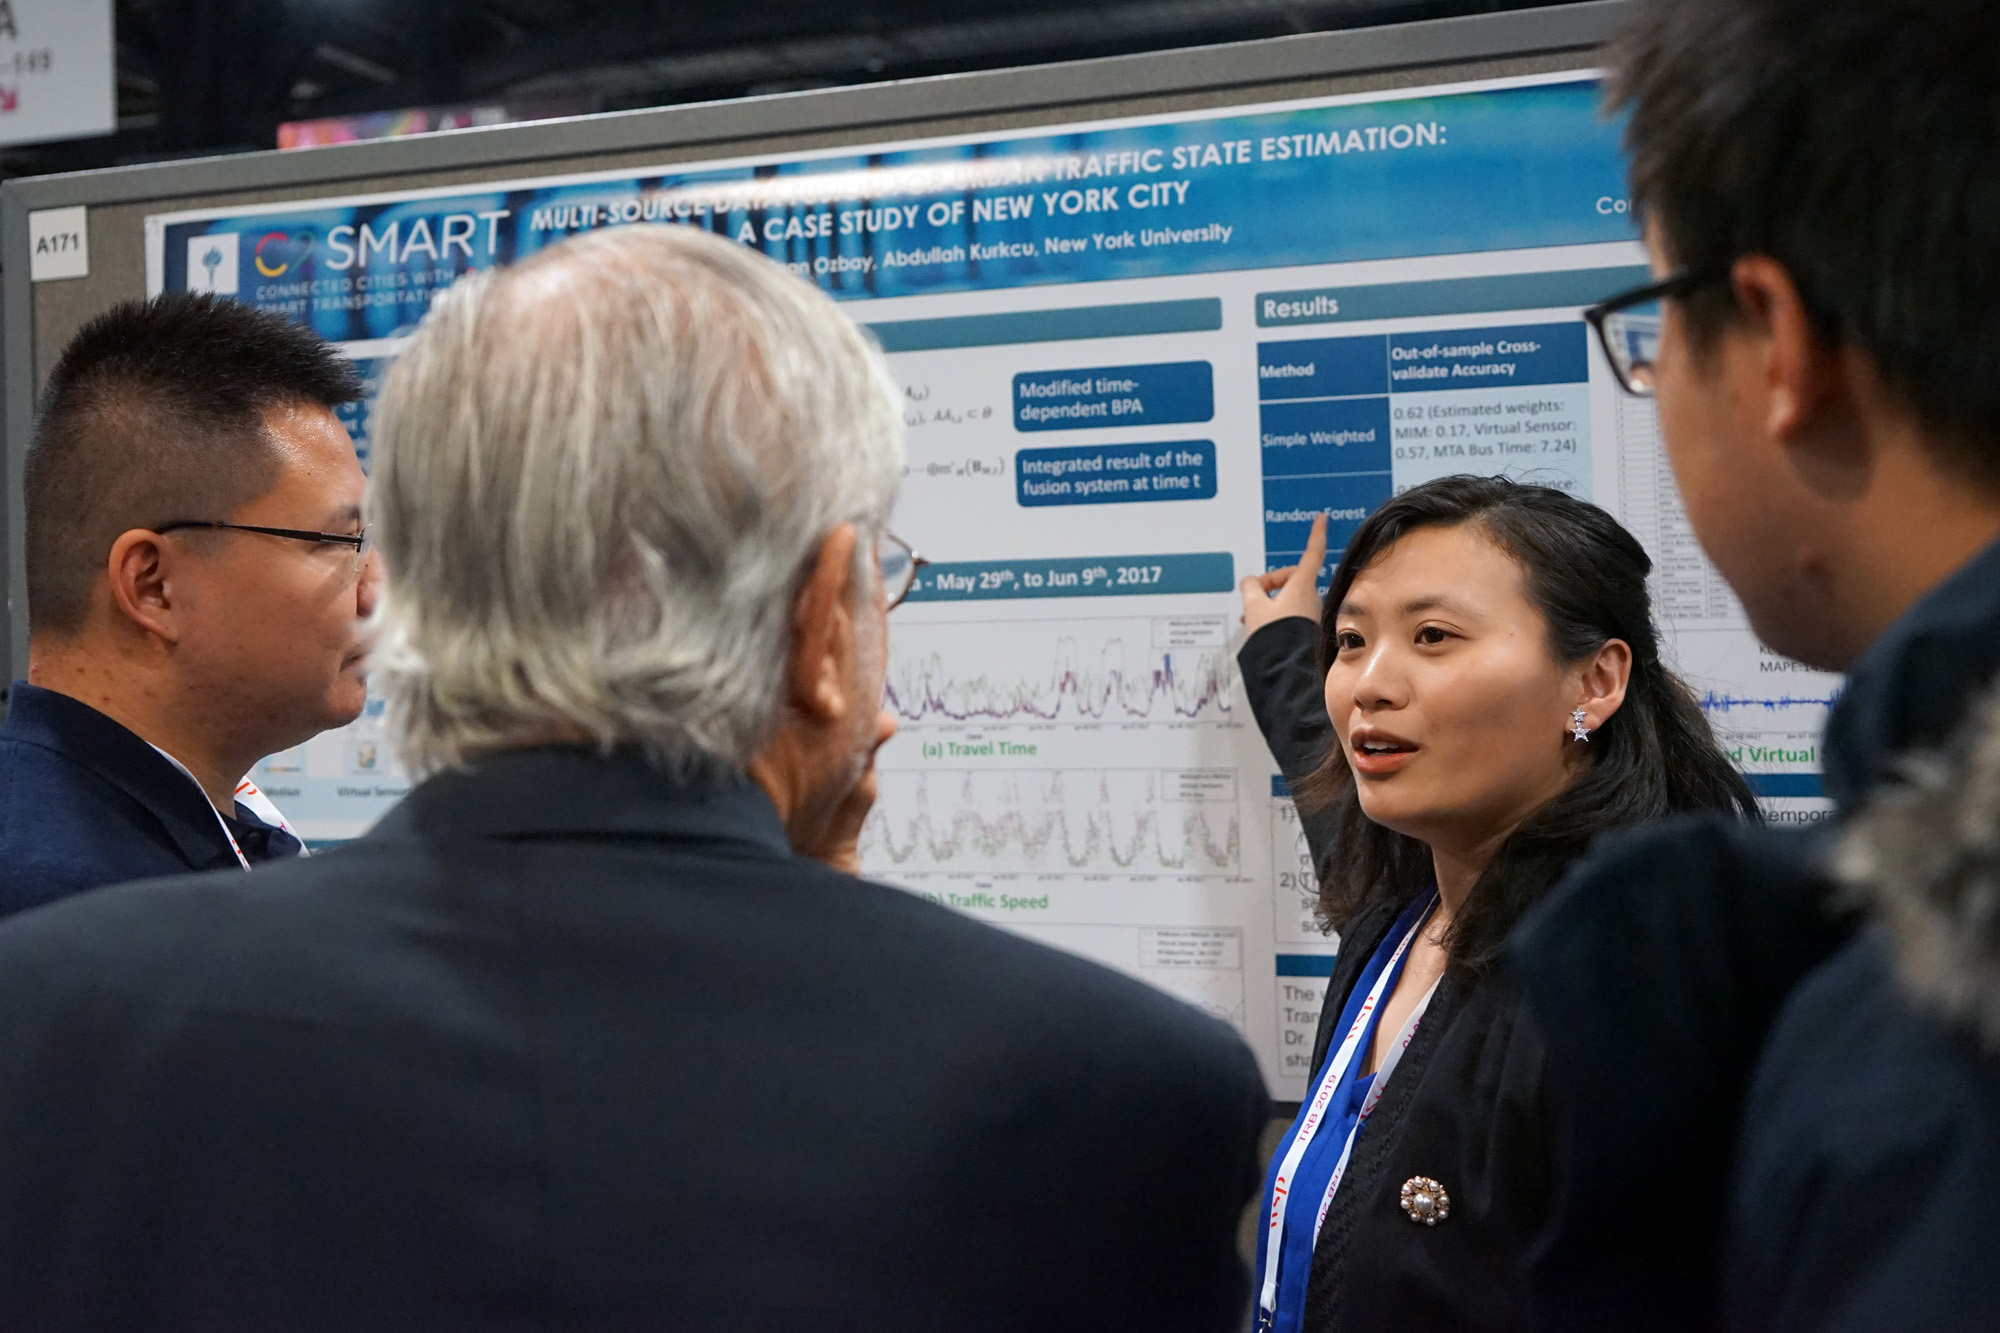 Graduate student Jingqin Gao answers questions about her research poster from conference attendees.